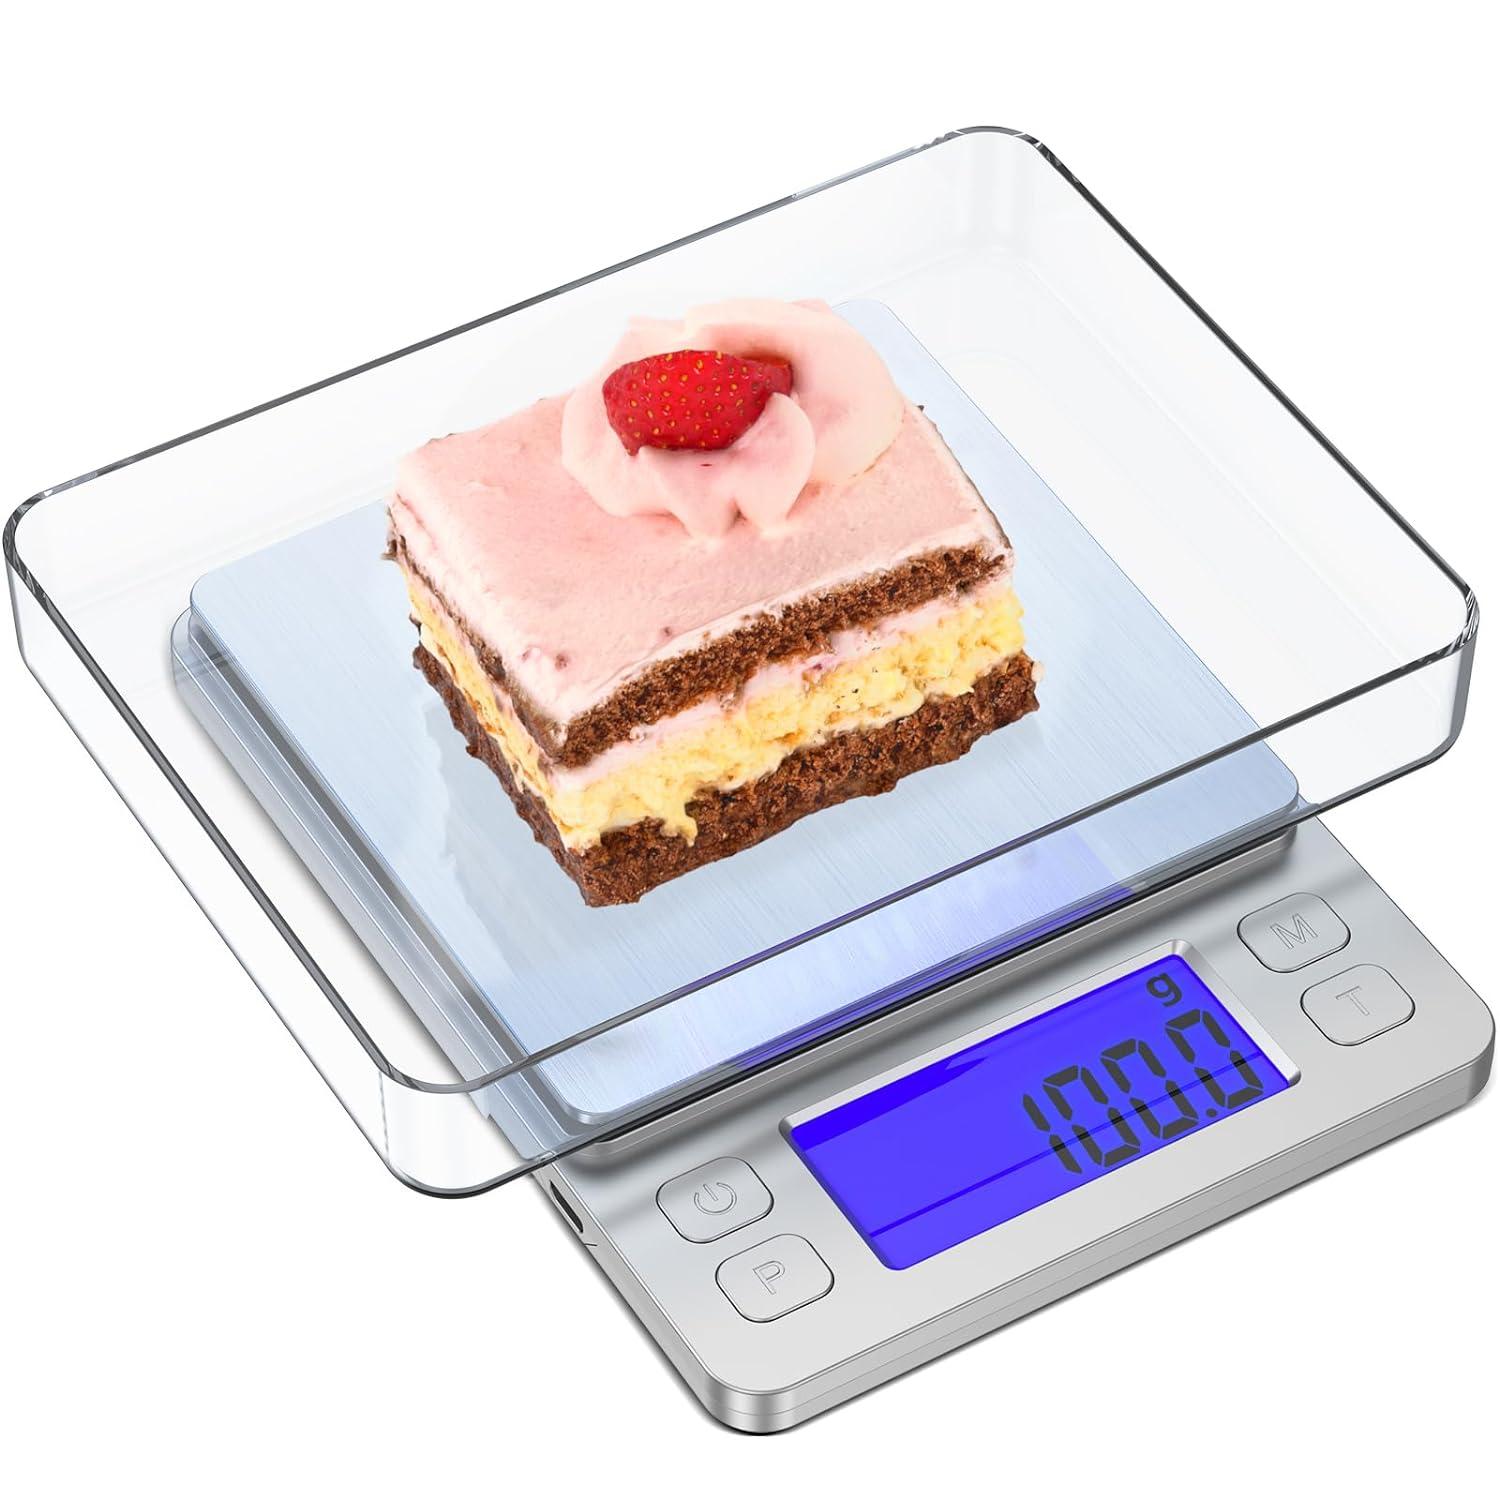 Food Kitchen Scale Food Scales Digital Weight for $6.49